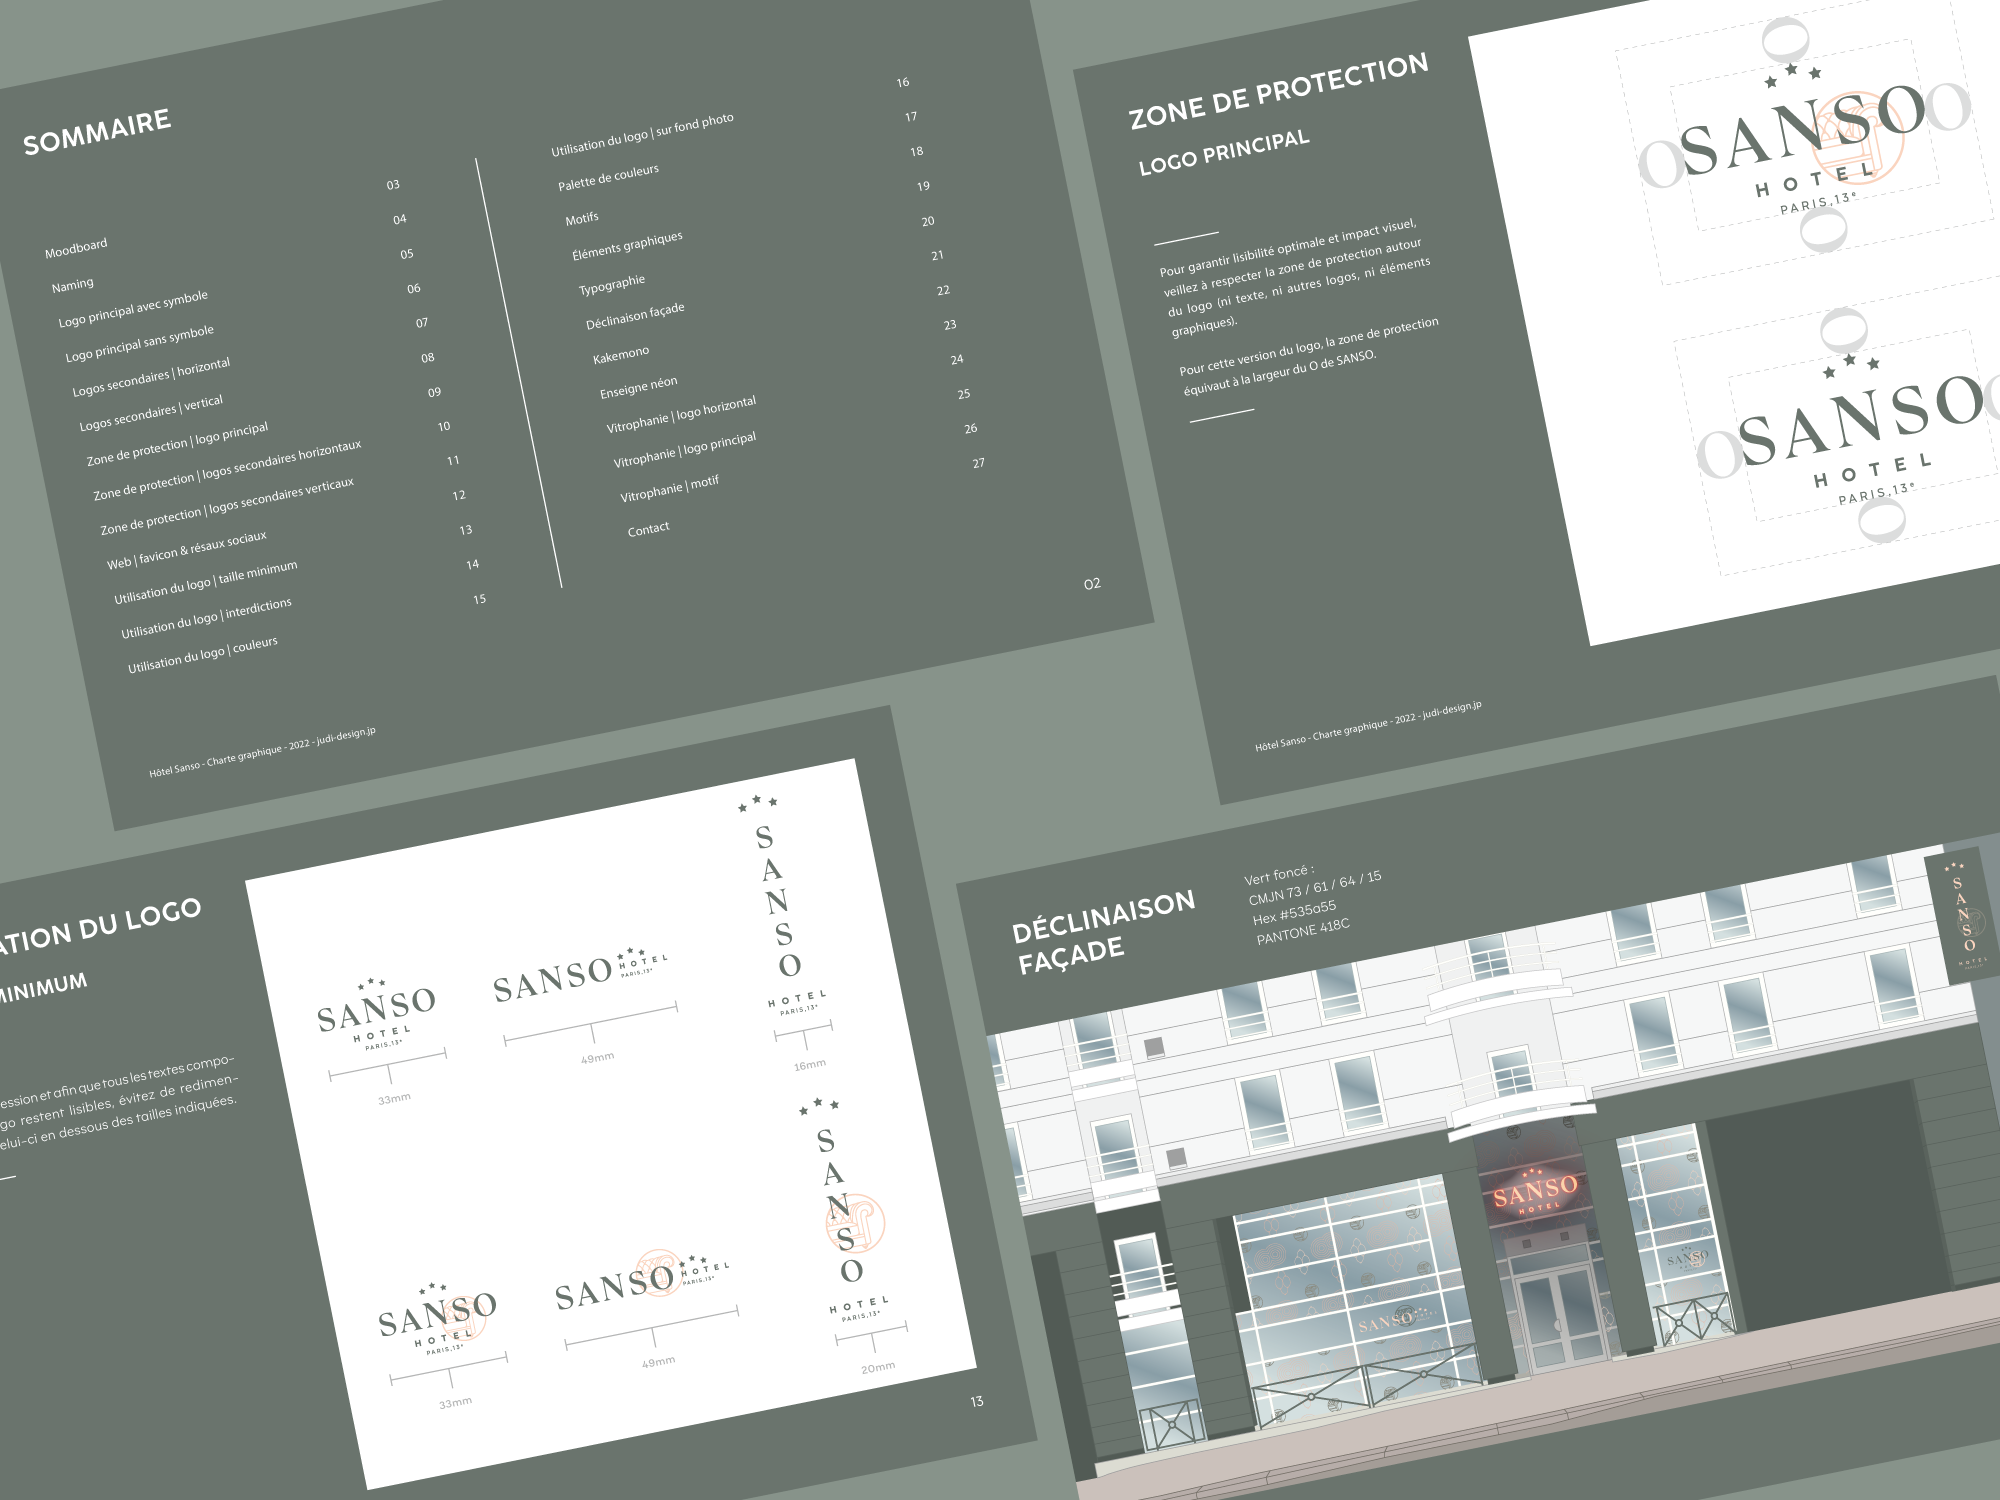 Sanso hotel brand guidelines